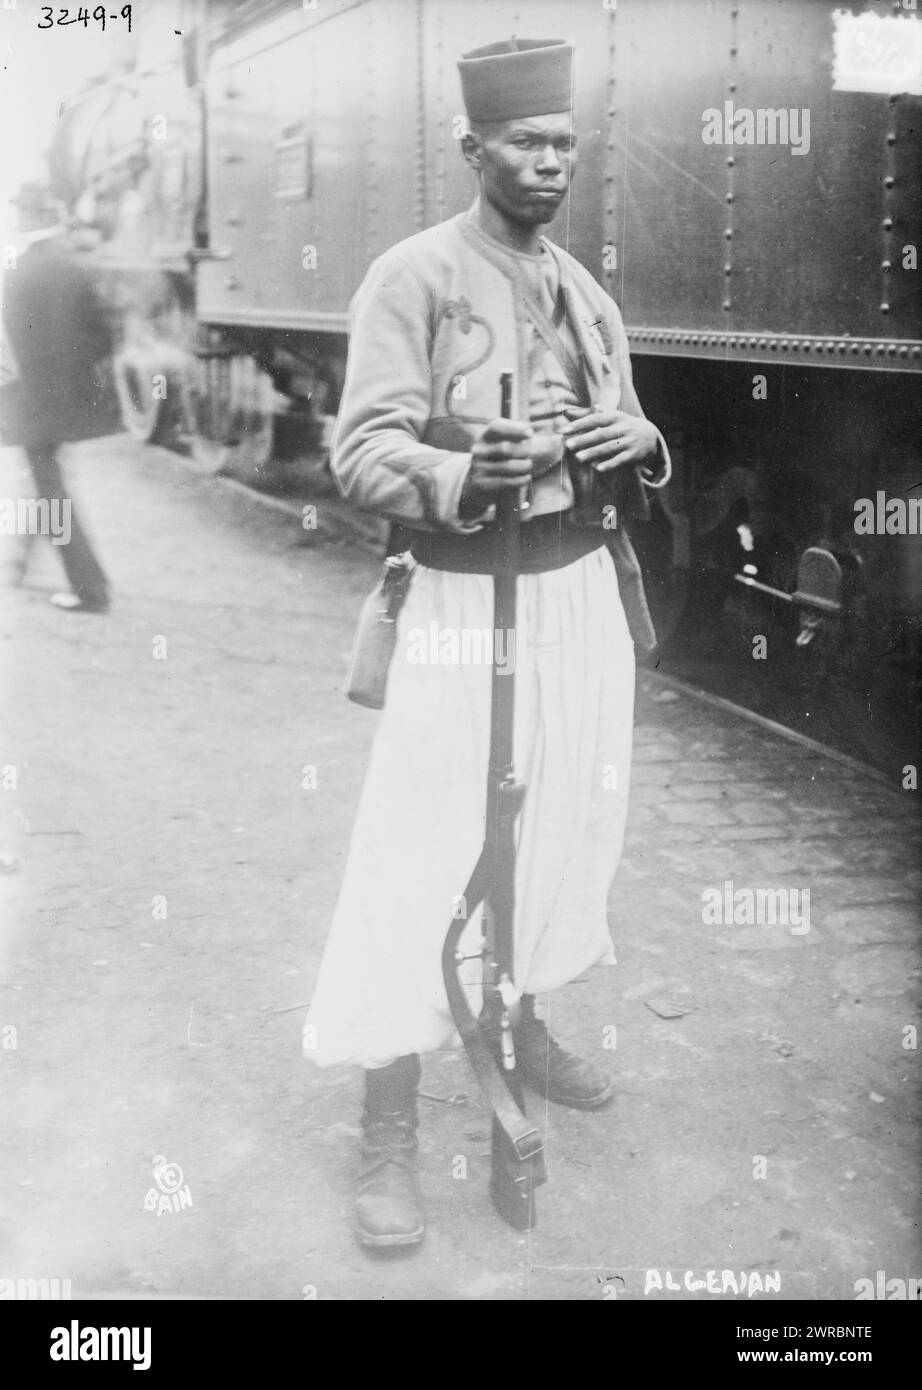 Algerian, Photograph shows a tirailleur, an infantry man in uniform from an army from French Equatorial Africa, possibly Senegal, preparing to assist France during World War I., 1914 Oct. 5, World War, 1914-1918, Glass negatives, 1 negative: glass Stock Photo